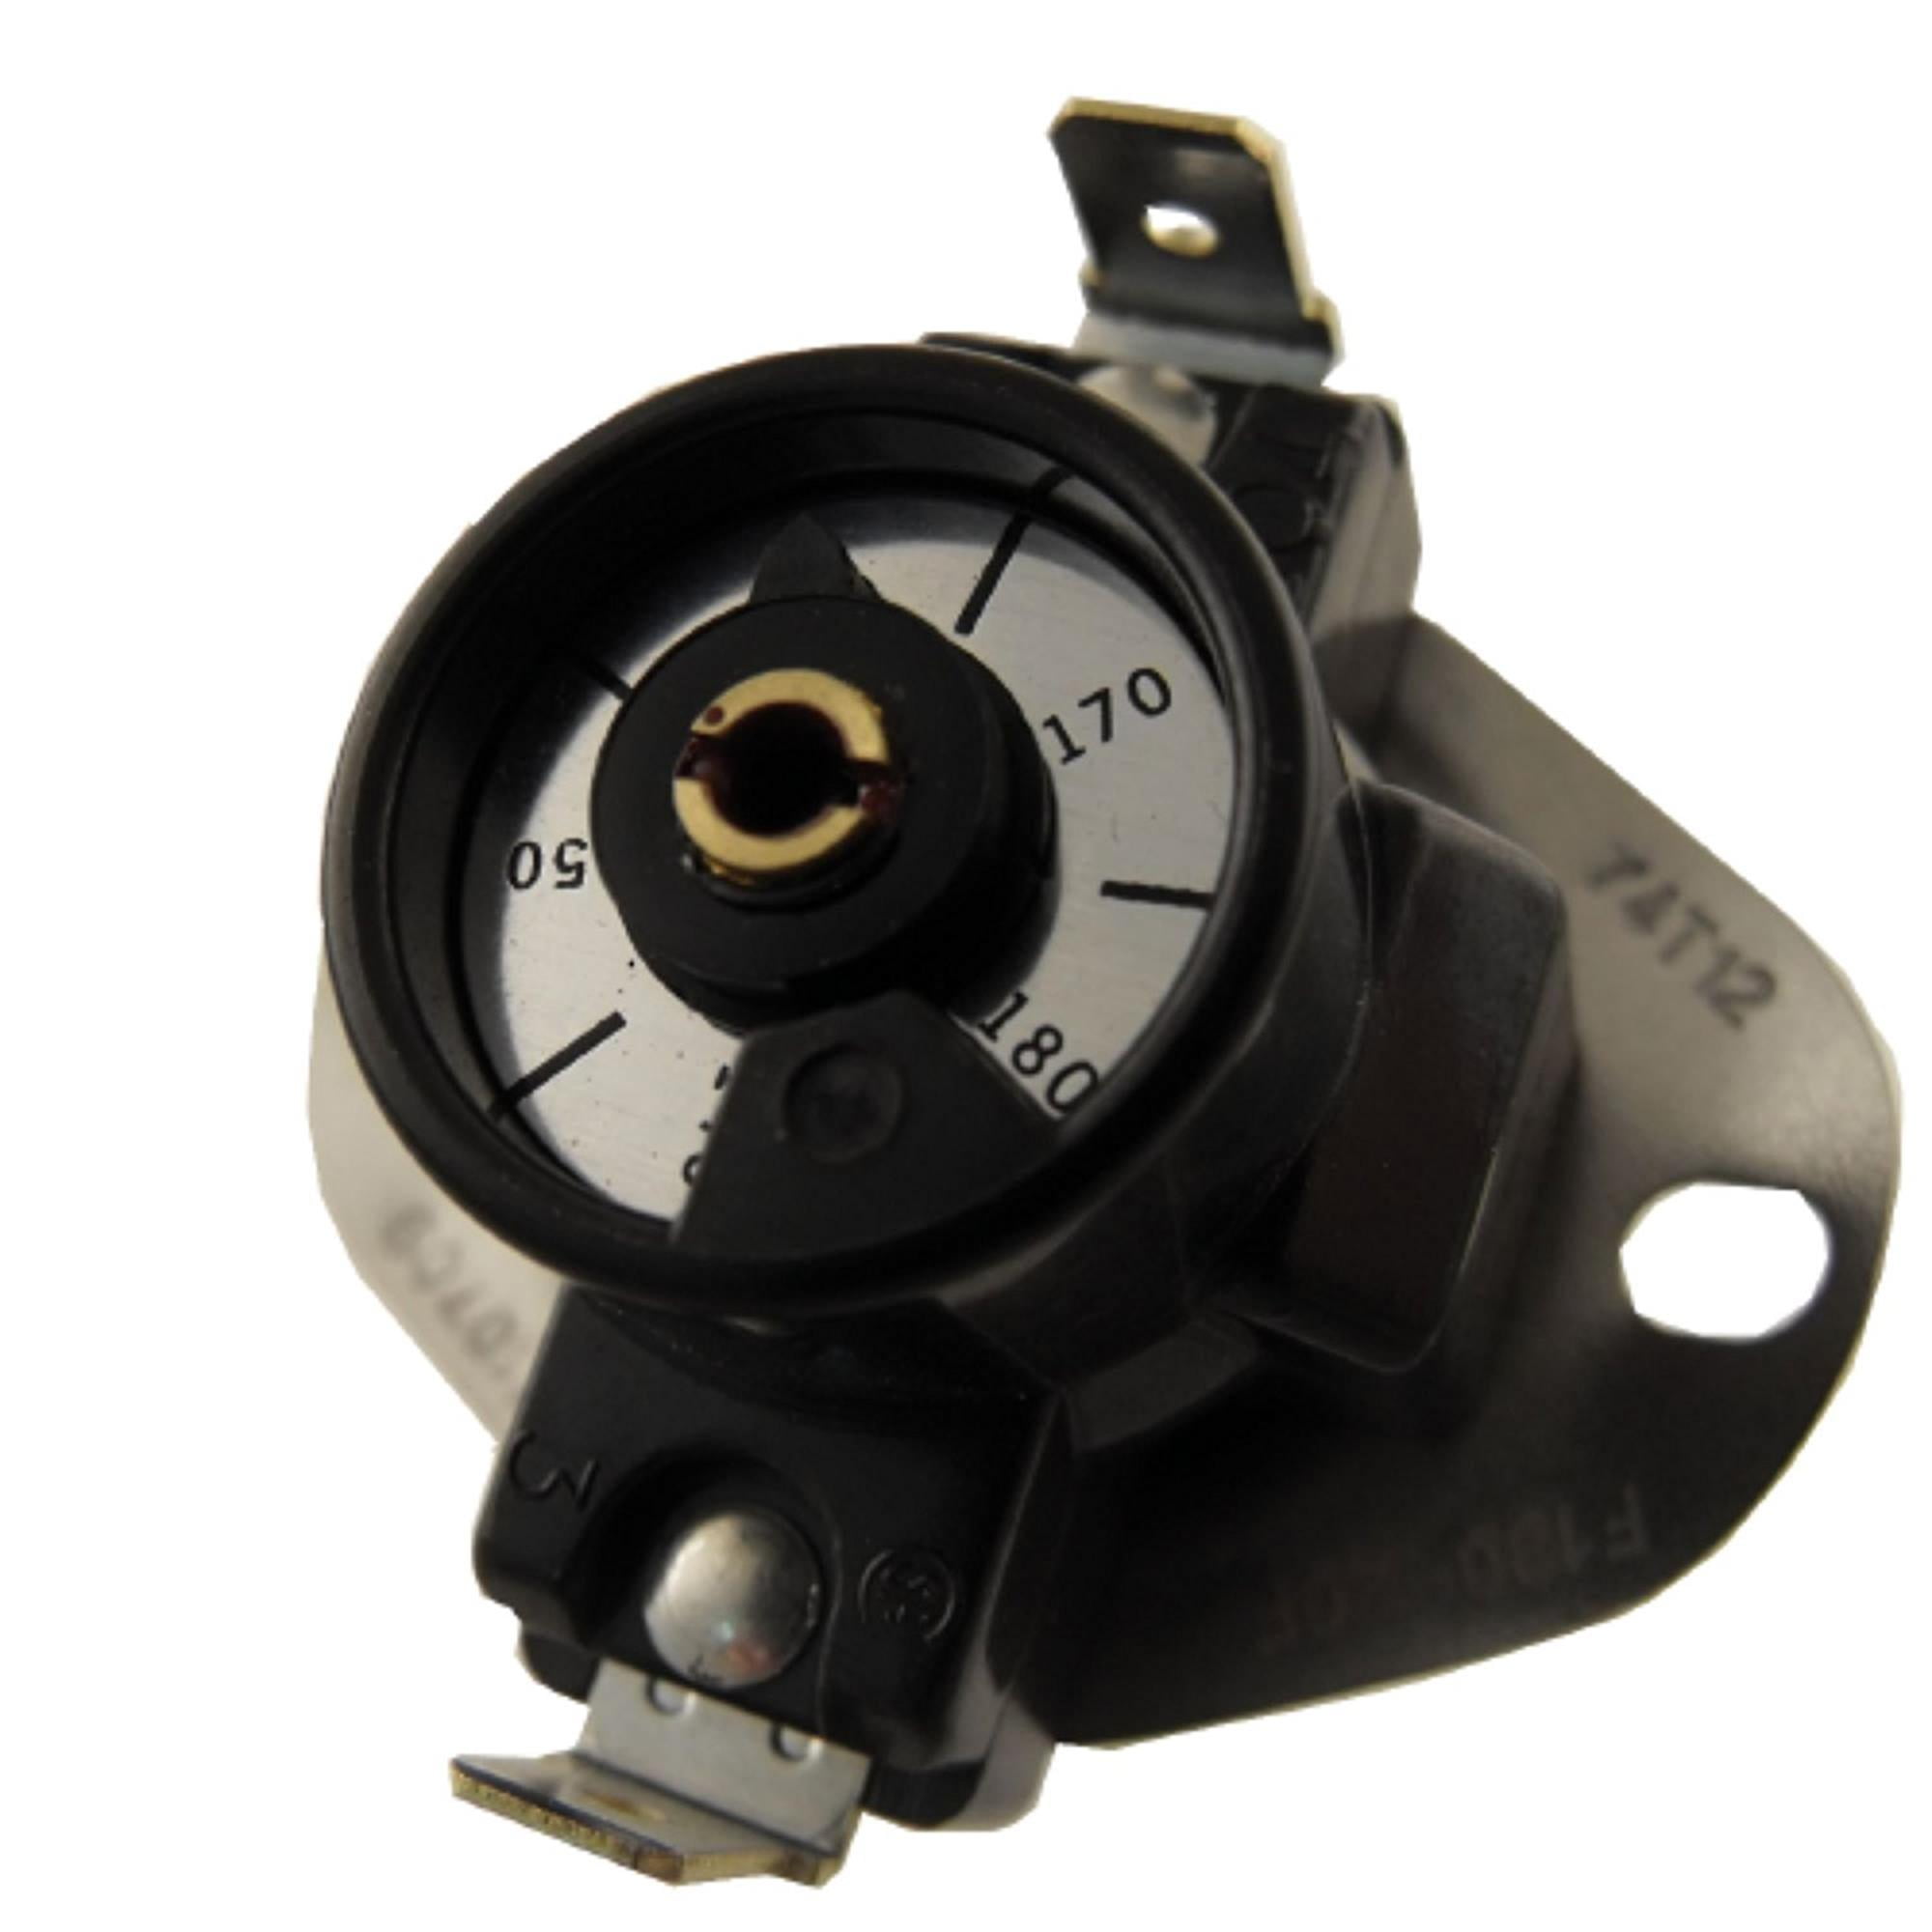 SUPCO THERMOSTAT 74T12 STYLE 310709 AT022 